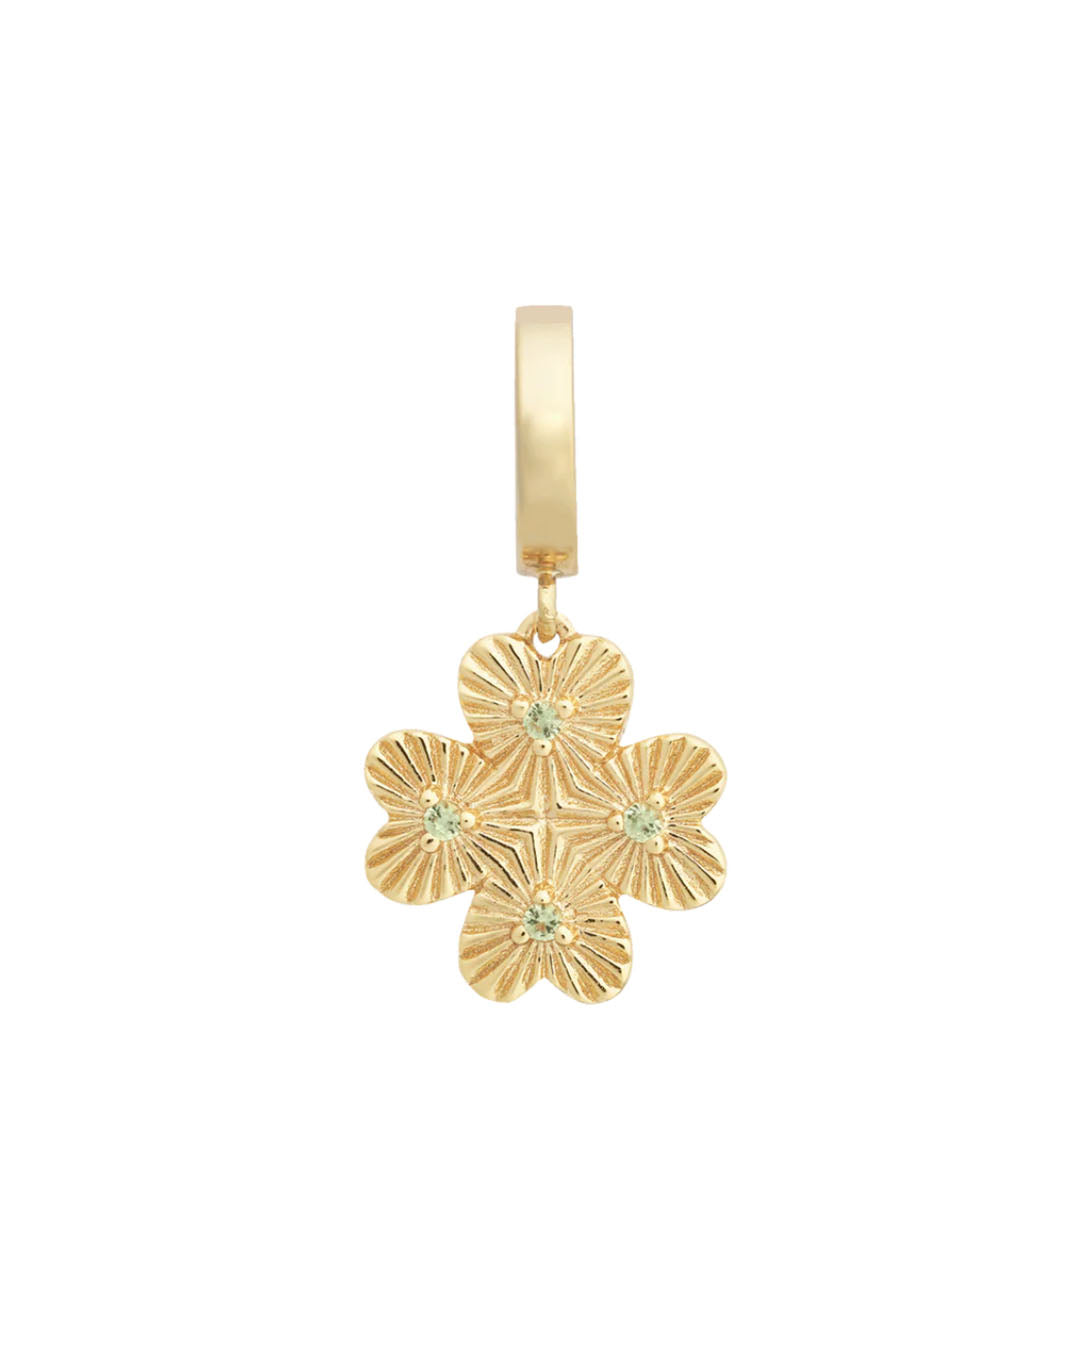 Clover Charm Jewellery by YCL Jewels - Prae Store